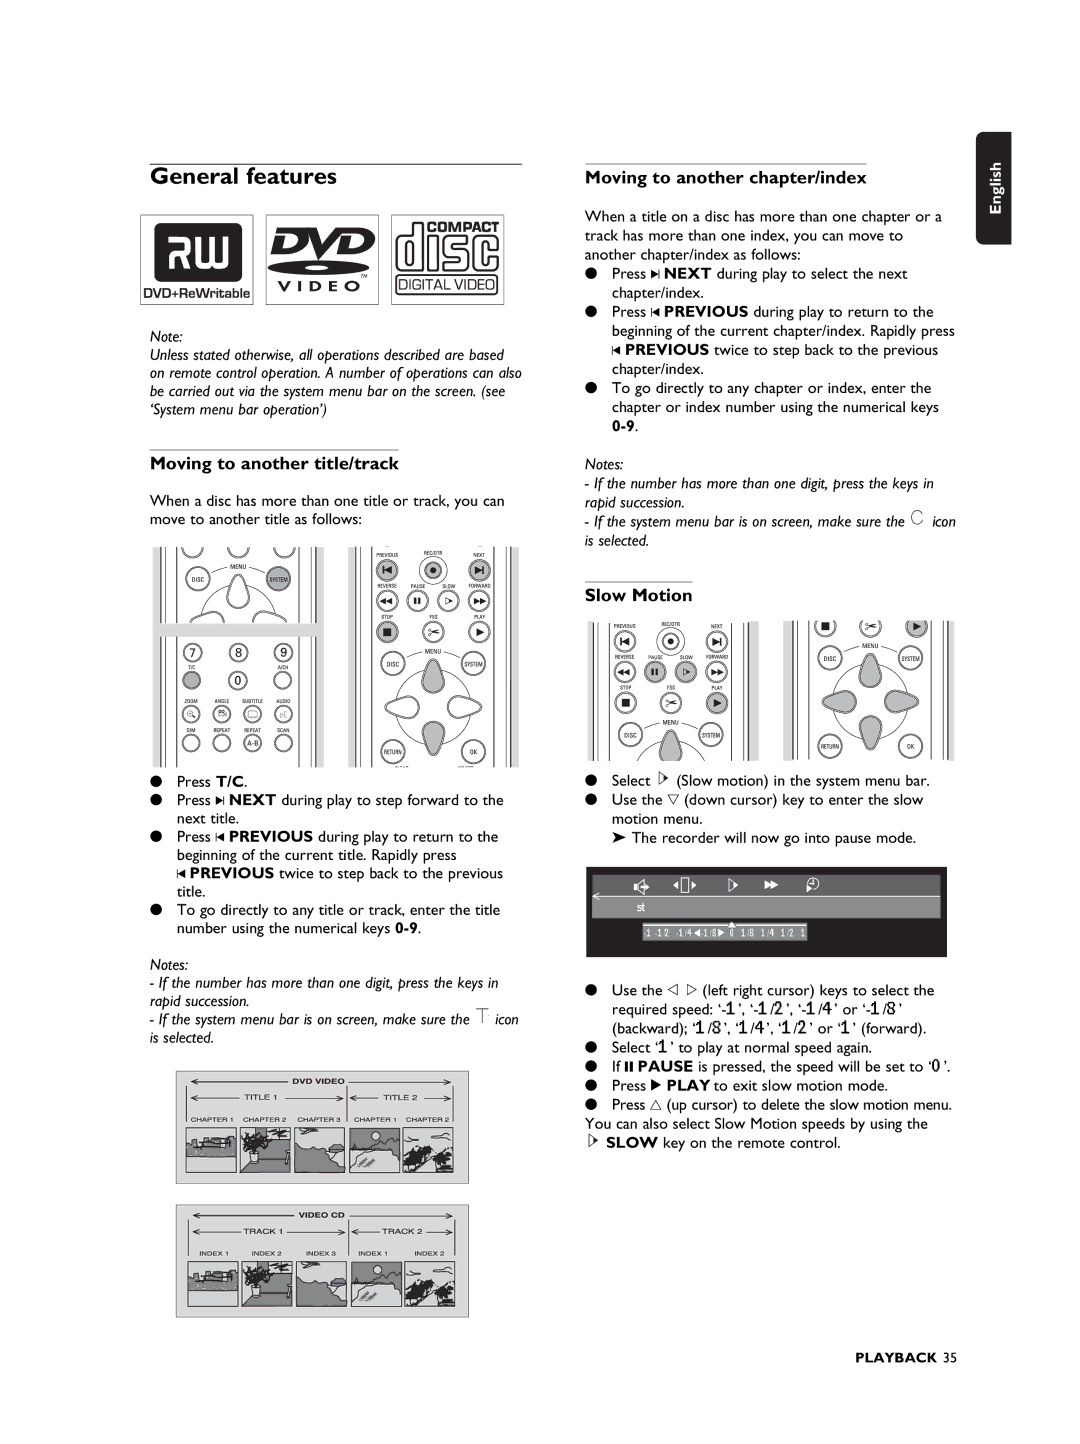 Philips DVDR990 manual General features, Moving to another title/track, Moving to another chapter/index, Slow Motion 